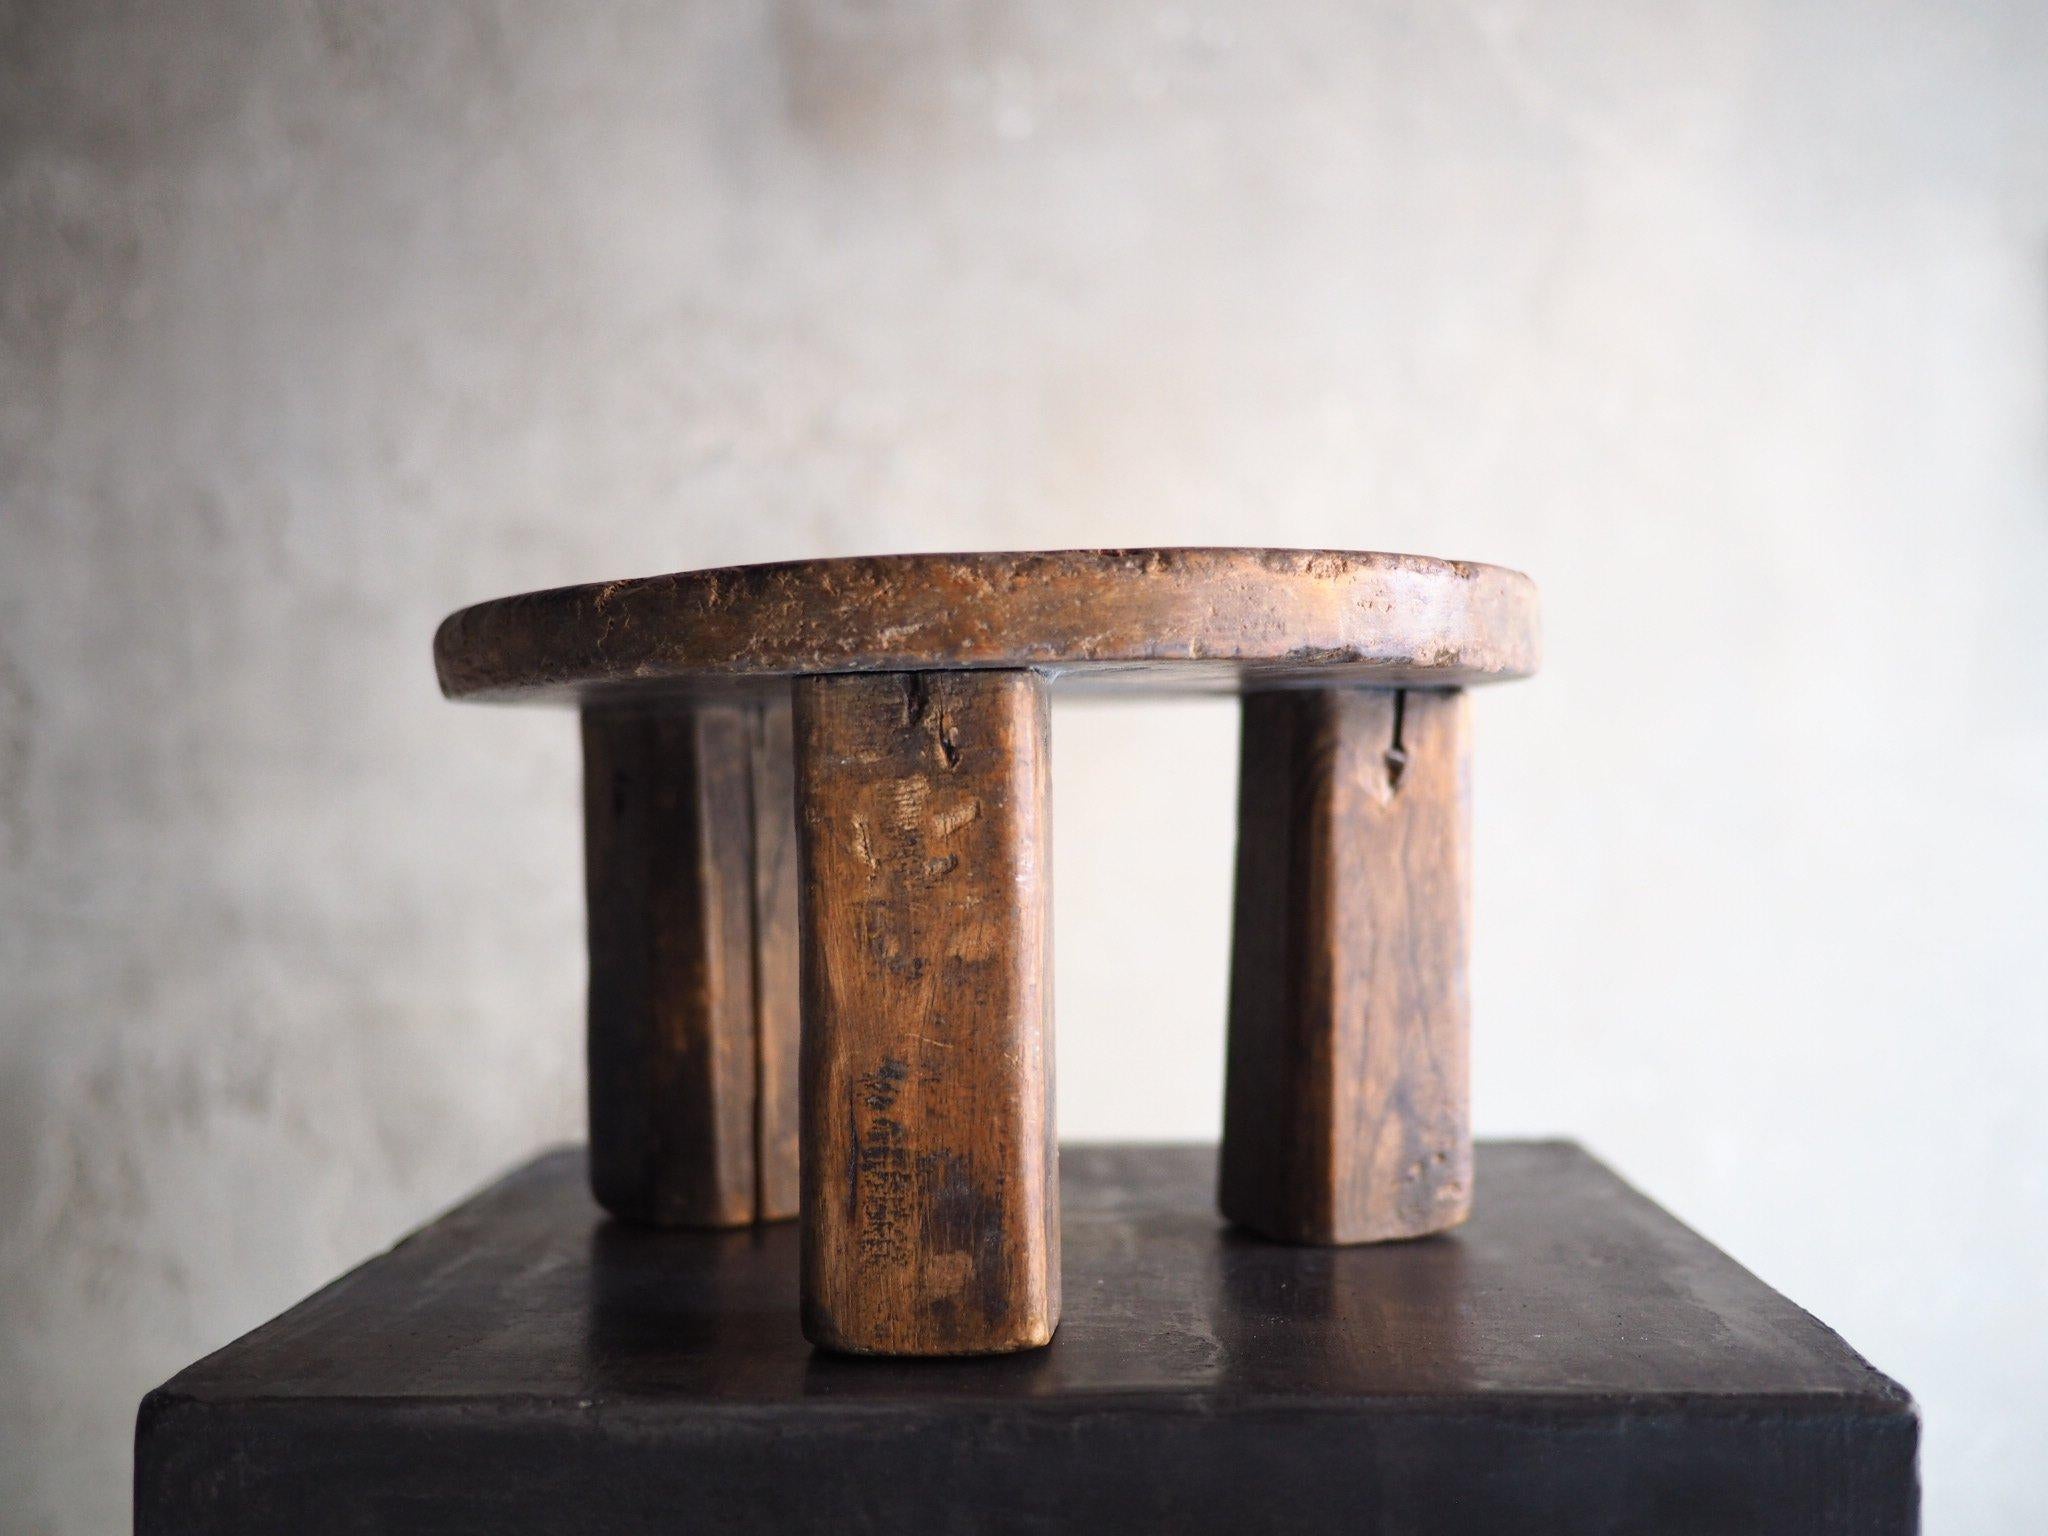 Primitive Wooden Stool, Three Leg Stool, c. 1800s In Good Condition For Sale In Melville, NY